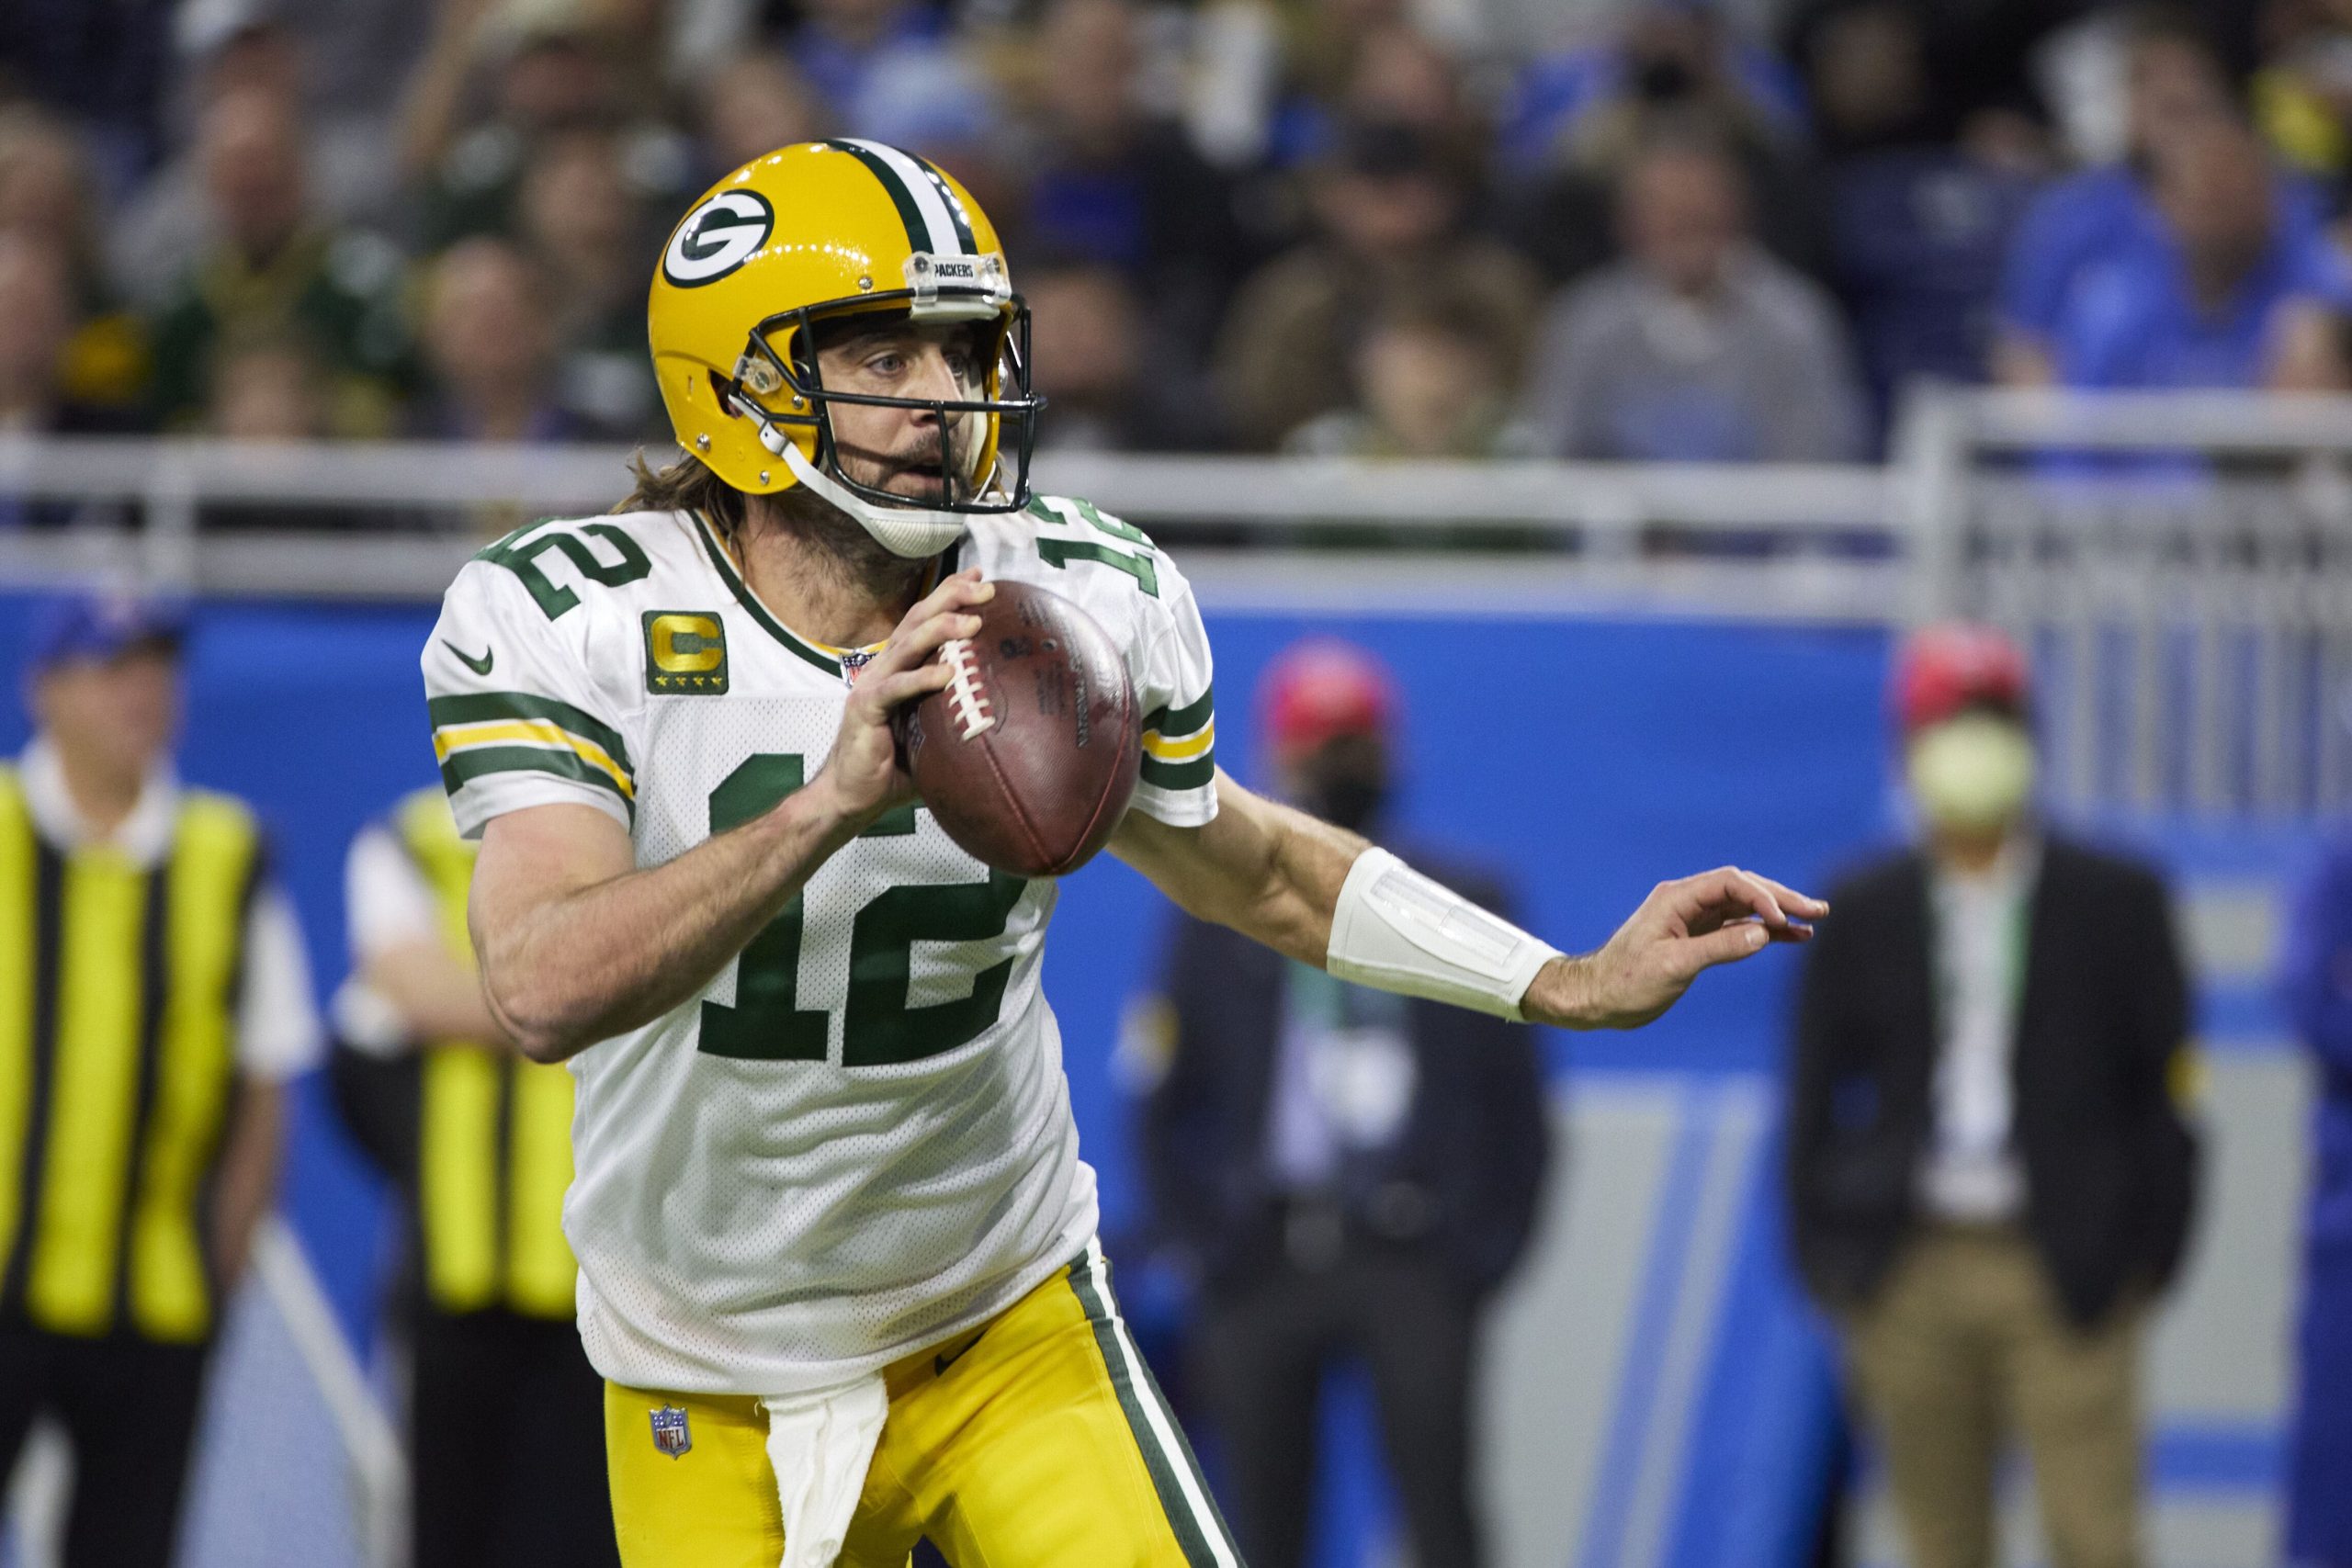 Green Bay Packers quarterback Aaron Rodgers (12) scrambles against the Detroit Lions during an NFL football game, Sunday, Jan. 9, 2022, in Detroit